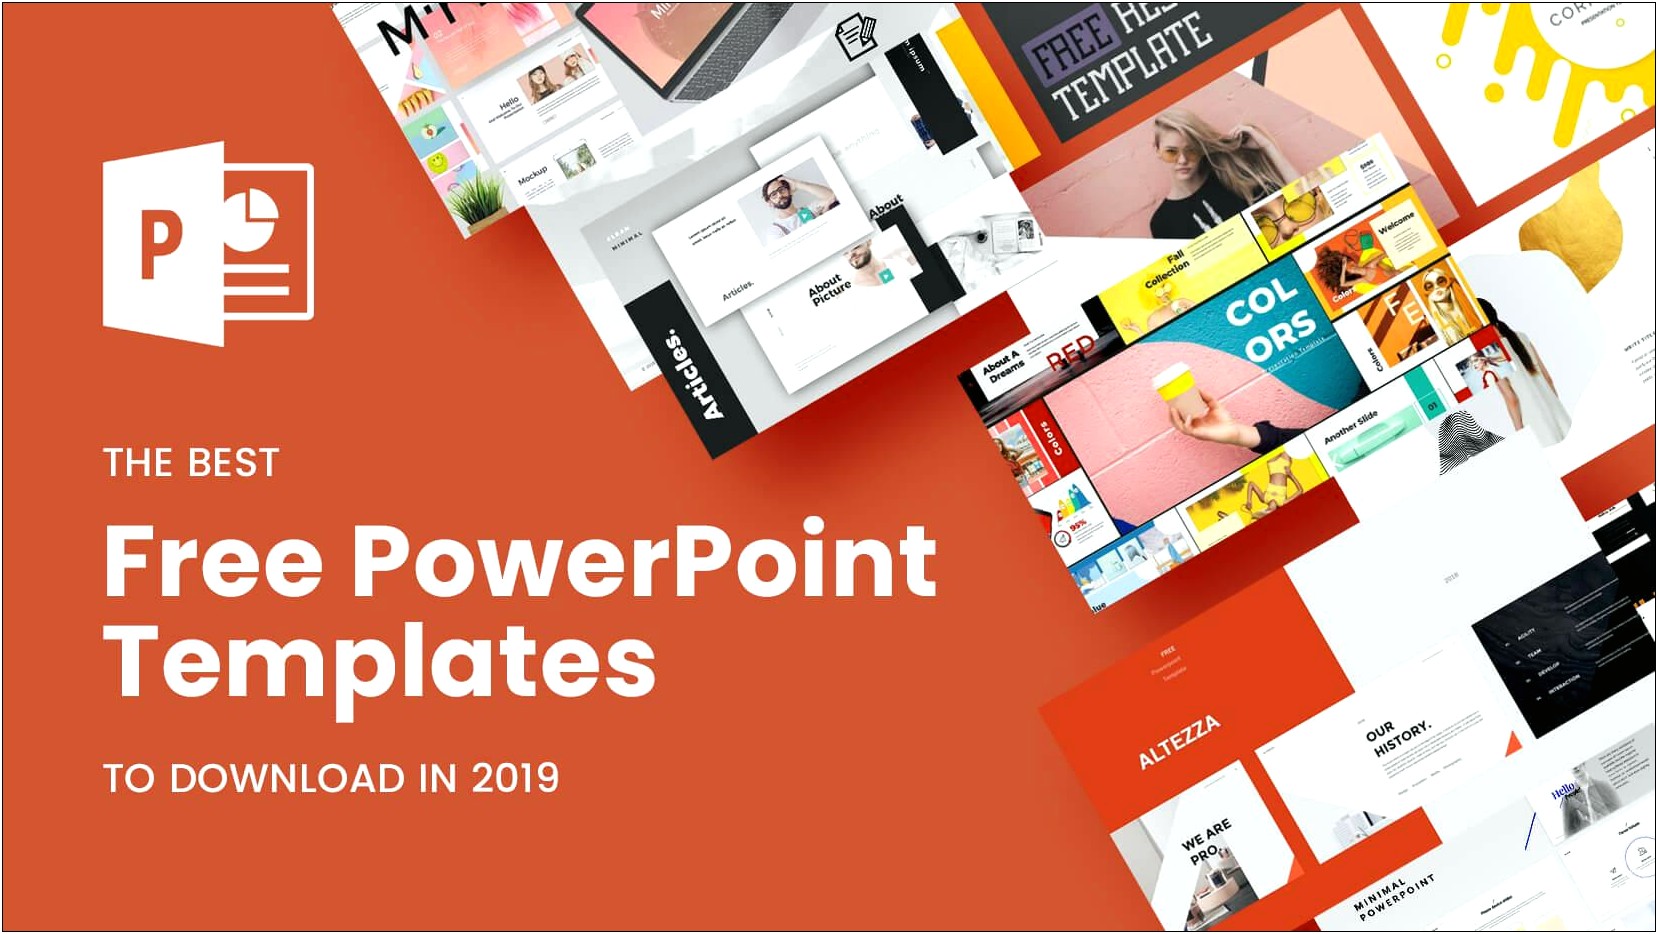 Powerpoint Presentation Templates 2018 Free Download